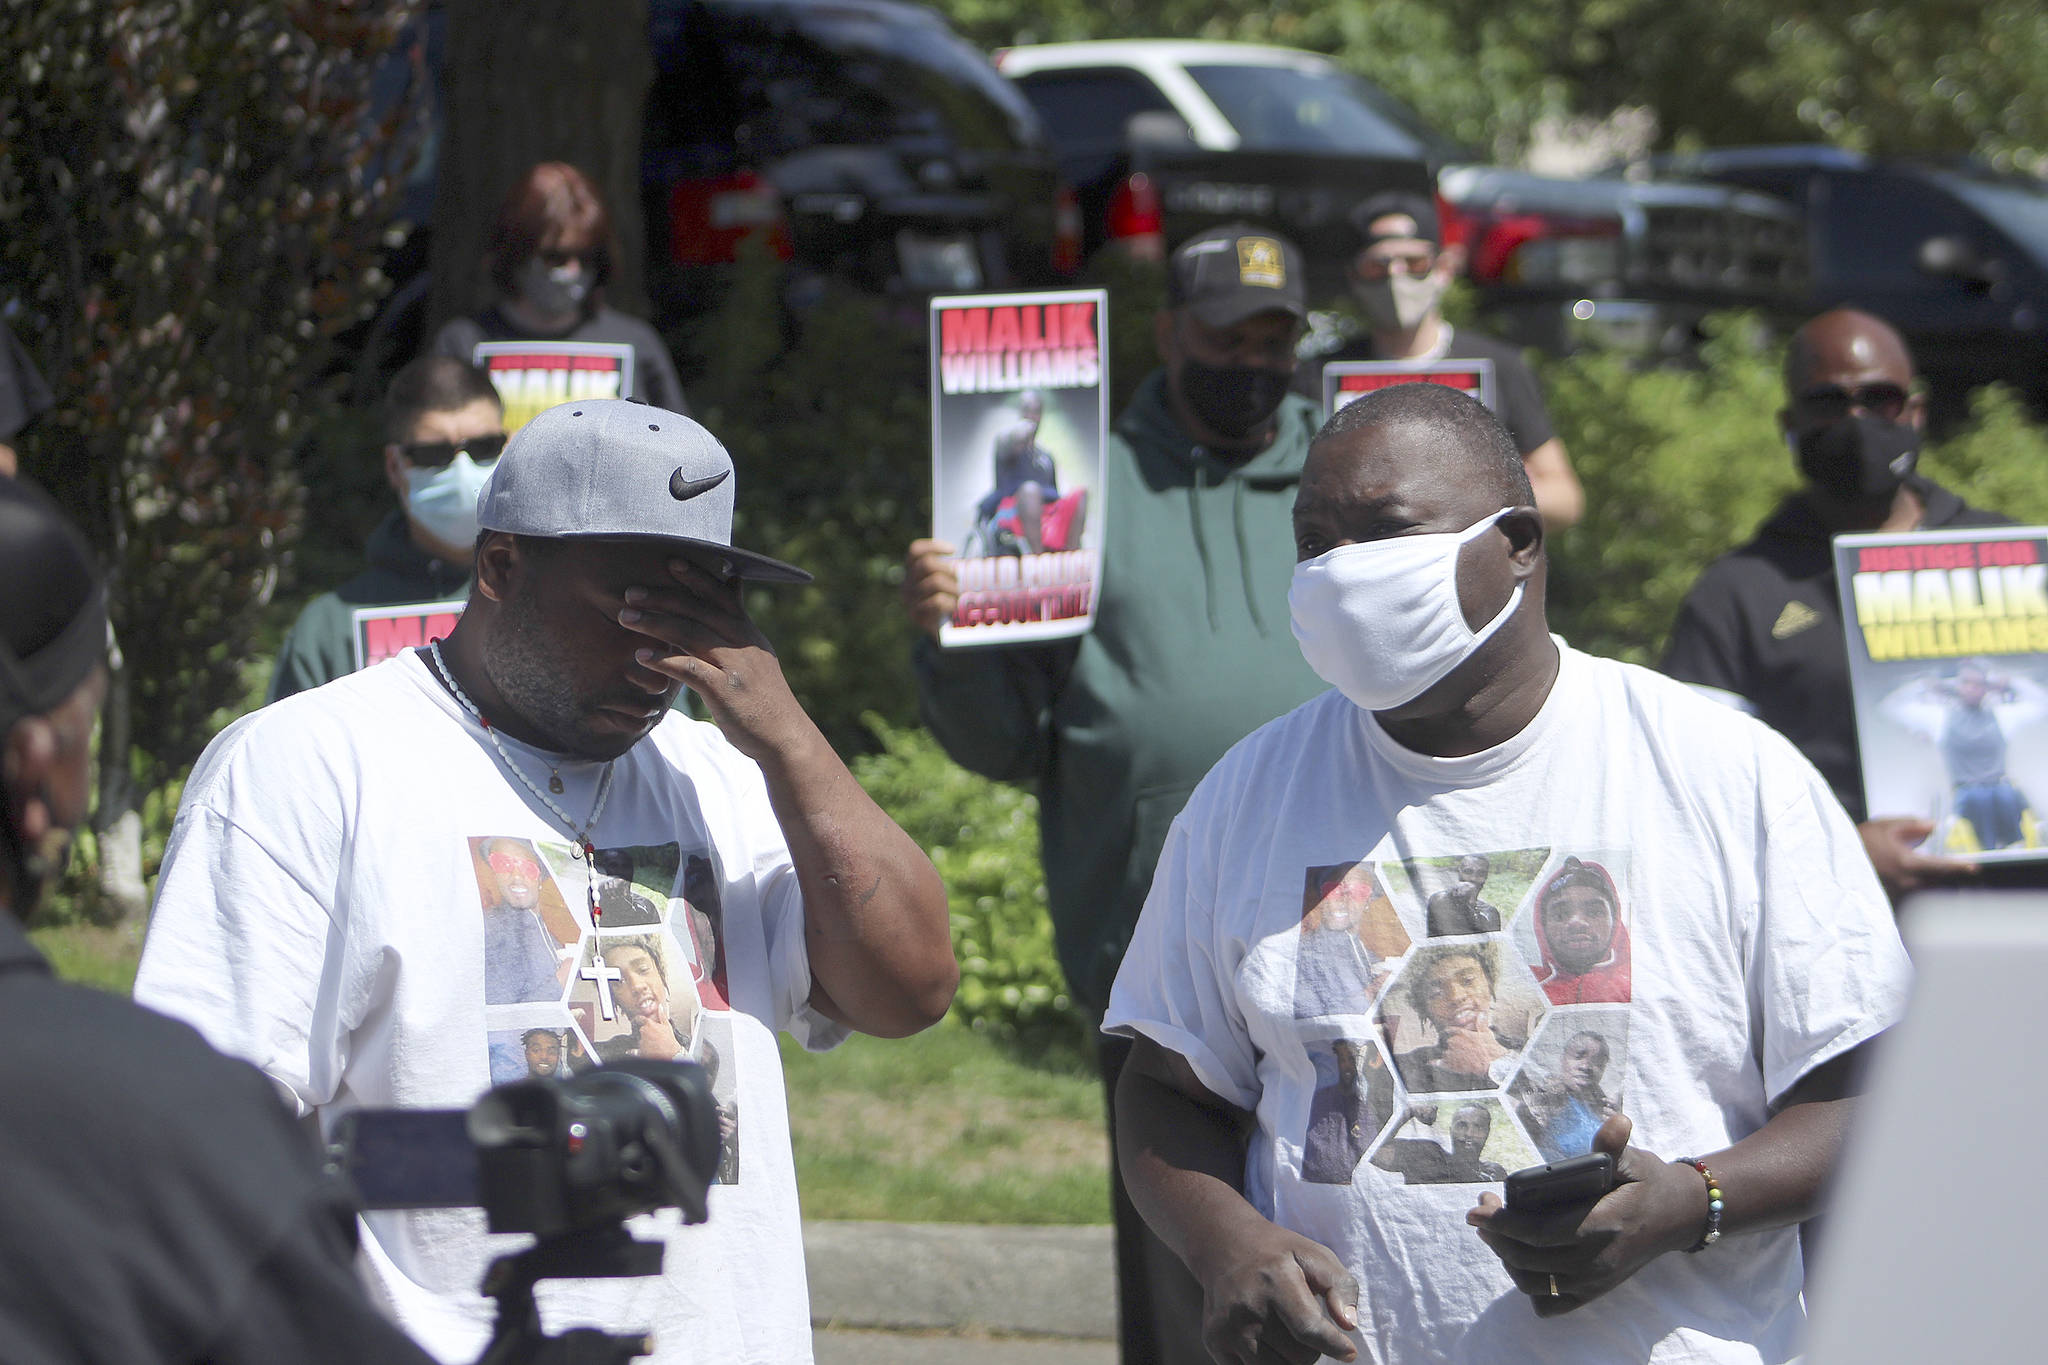 Marvin Phelps Jr., left, is overcome with emotion as he and Marvin Phelps, right, speak to the crowd at a protest in support of justice for Malik Williams on June 28. Olivia Sullivan/staff photo